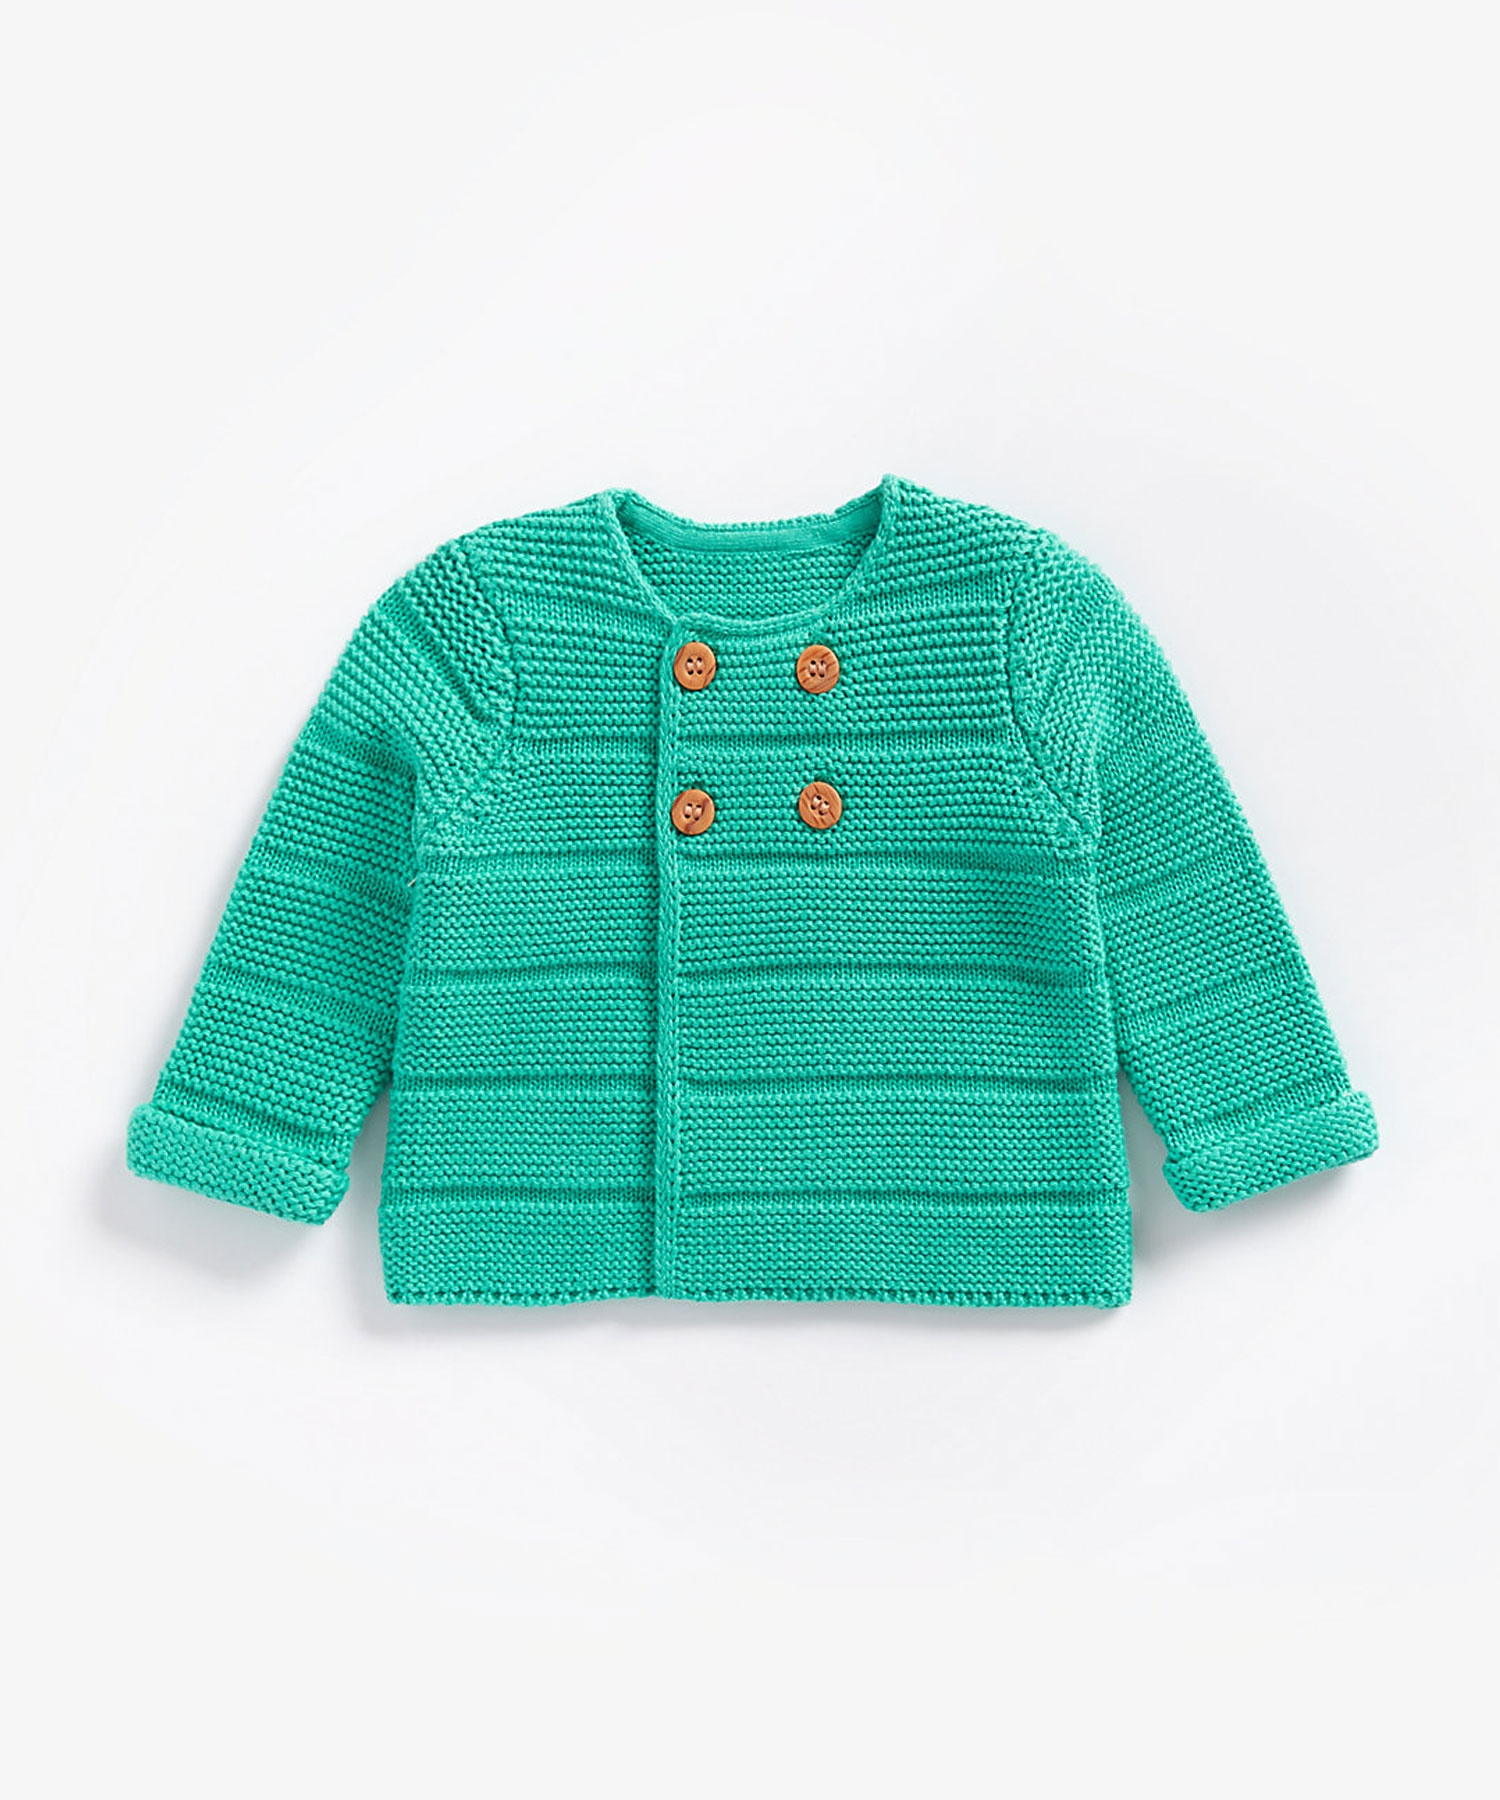 Mothercare | Boys Full Sleeves Cardigan With Button Fastening - Green